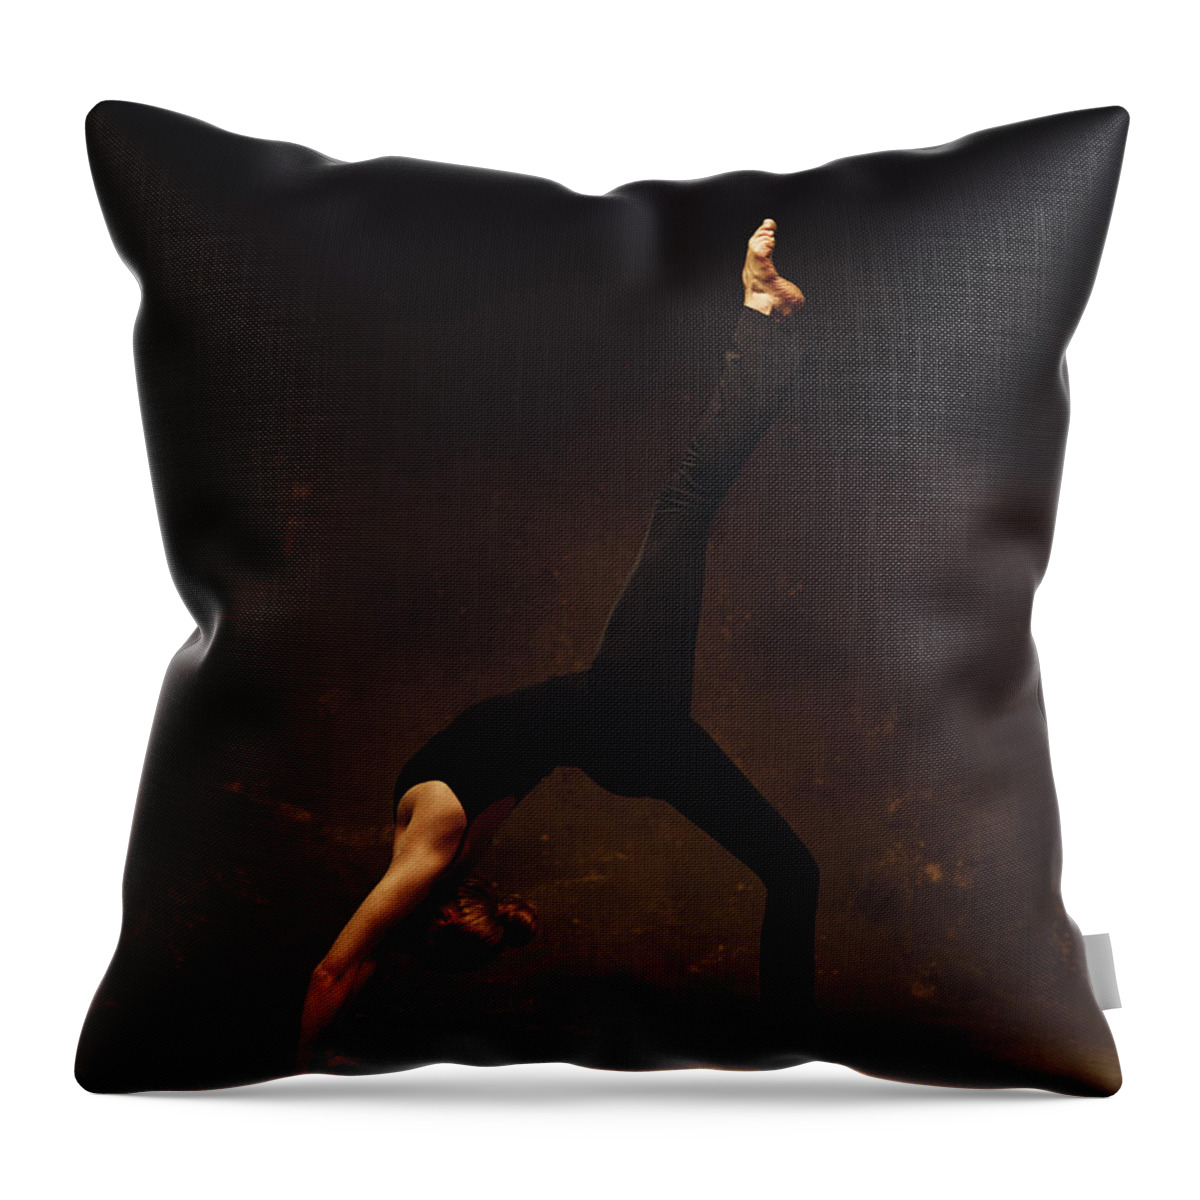 Ballet Dancer Throw Pillow featuring the photograph A Young Caucasian Female Dancer In A by Photodisc